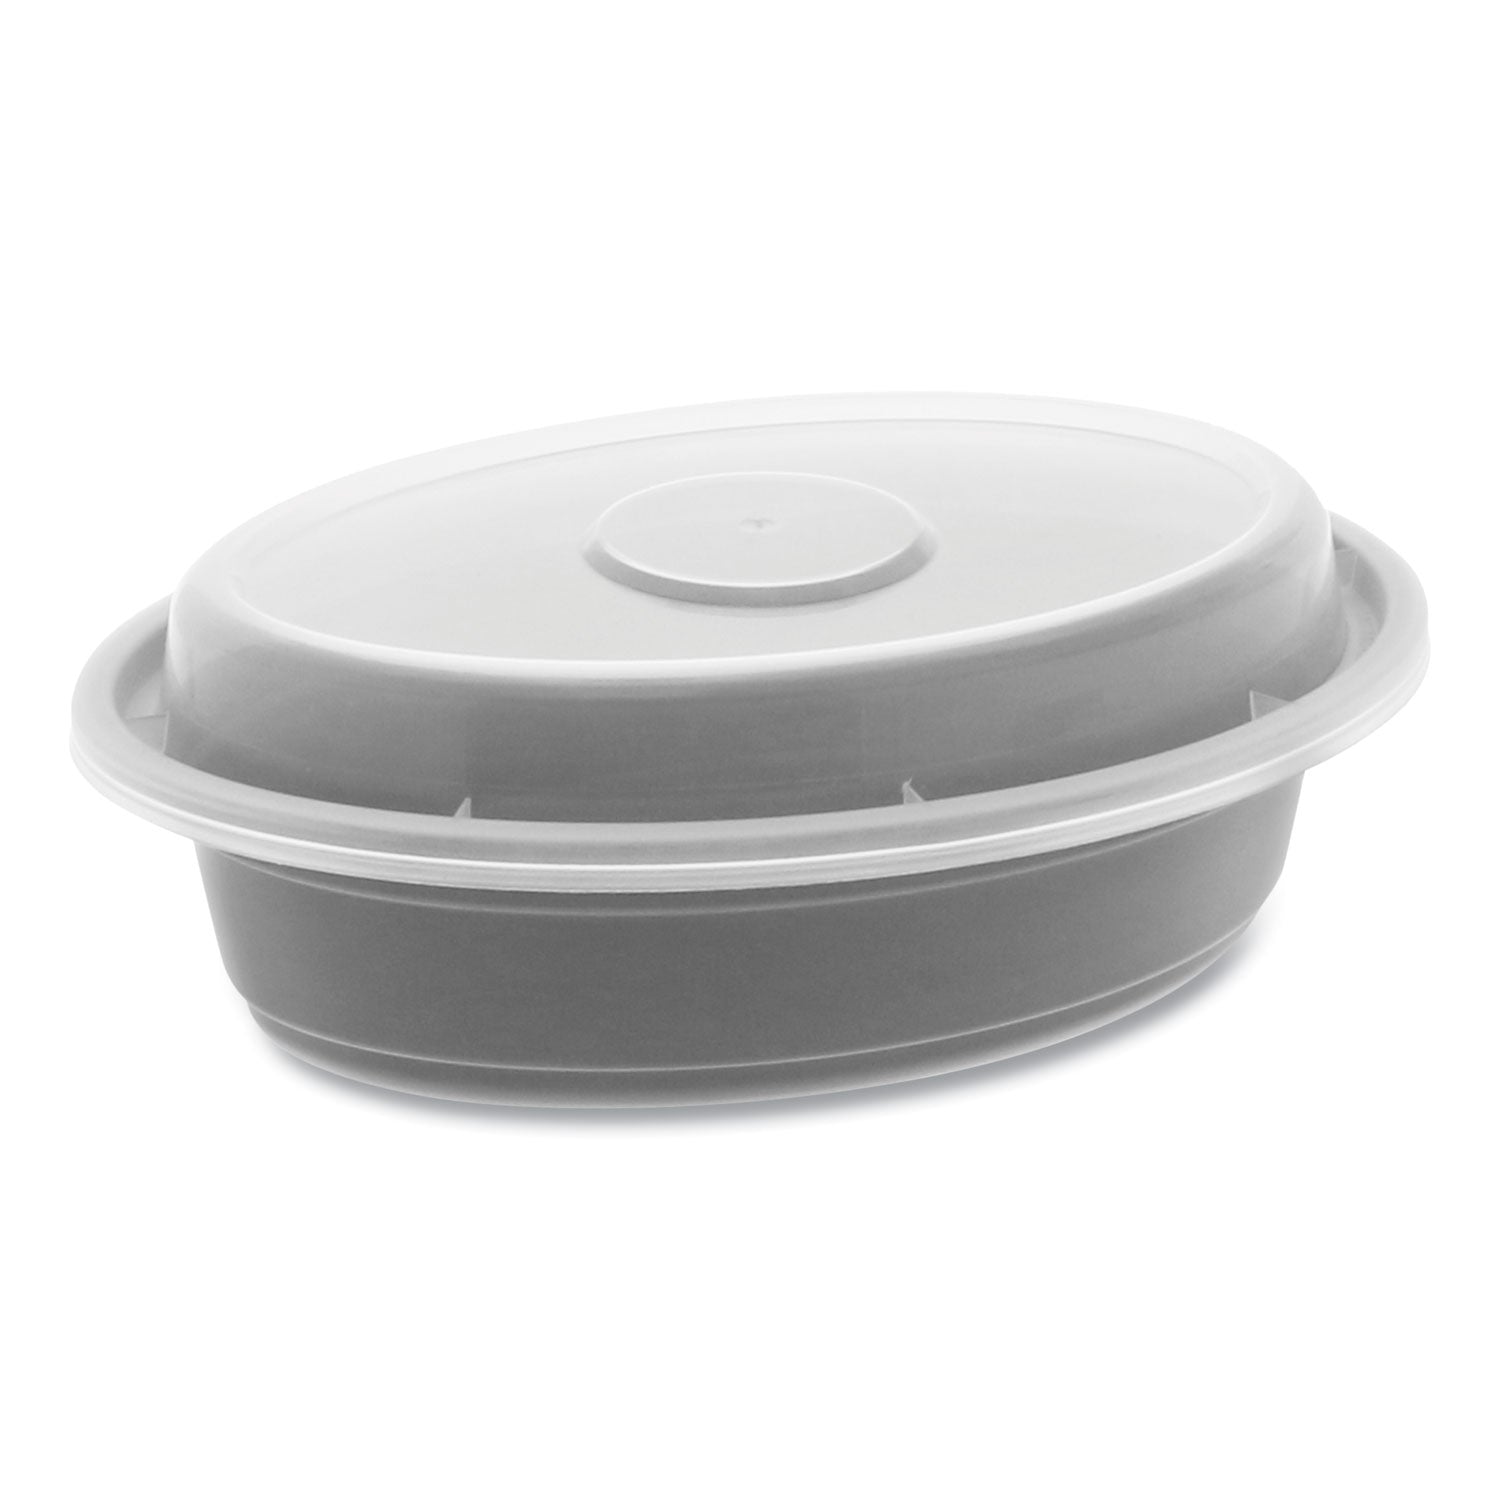 newspring-versatainer-microwavable-containers-oval-8-oz-57-x-4-x-145-black-clear-plastic-150-carton_pctoc08b - 1